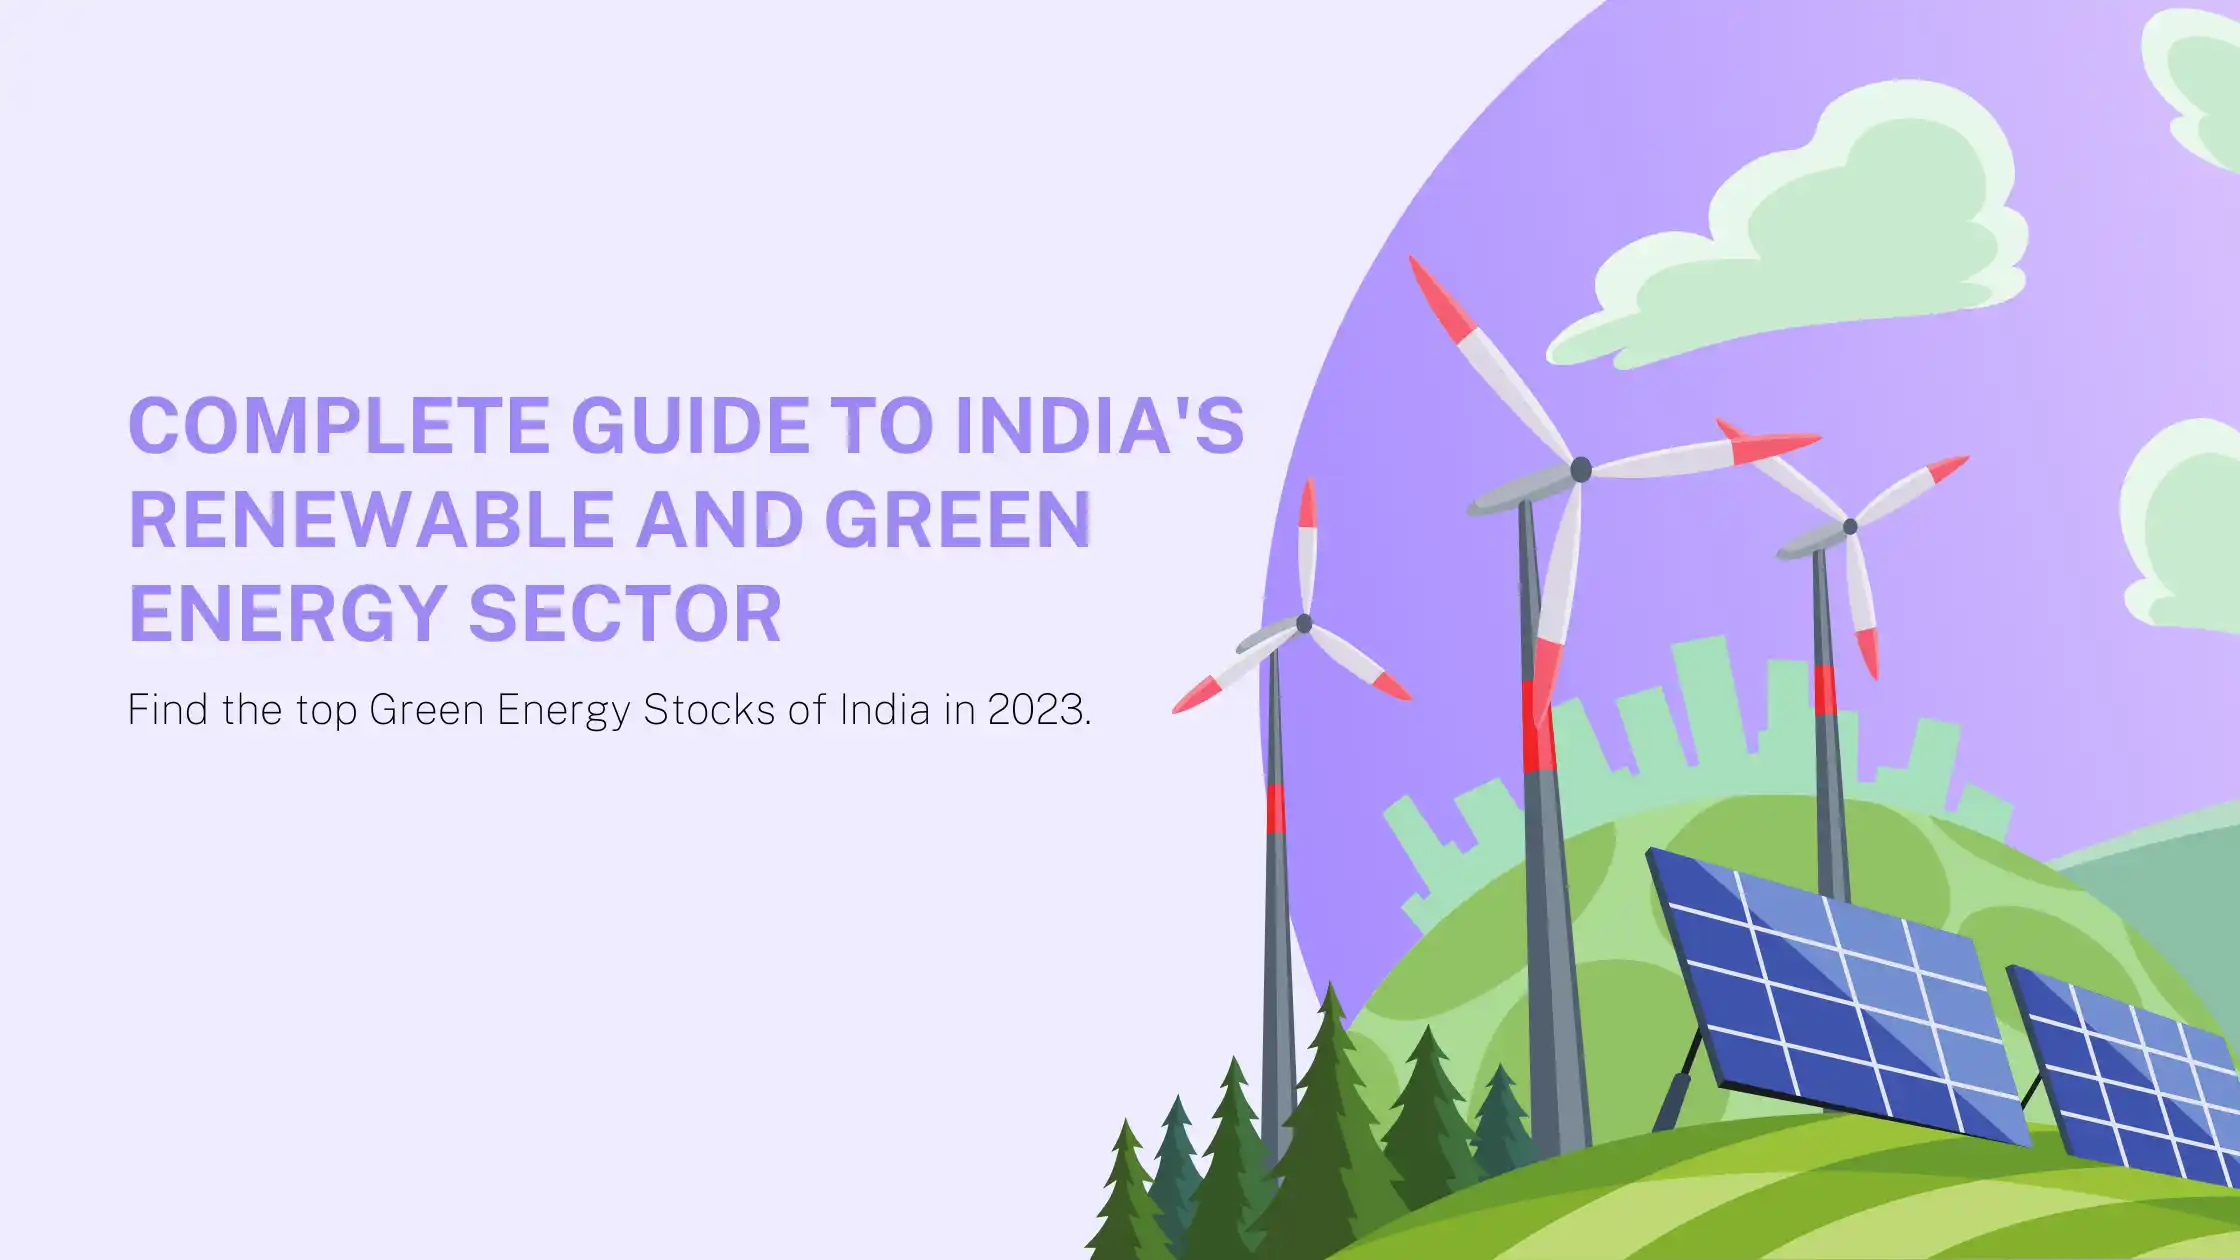 Complete Guide to India's Renewable and Green Energy Sector: Top Green Energy Stocks